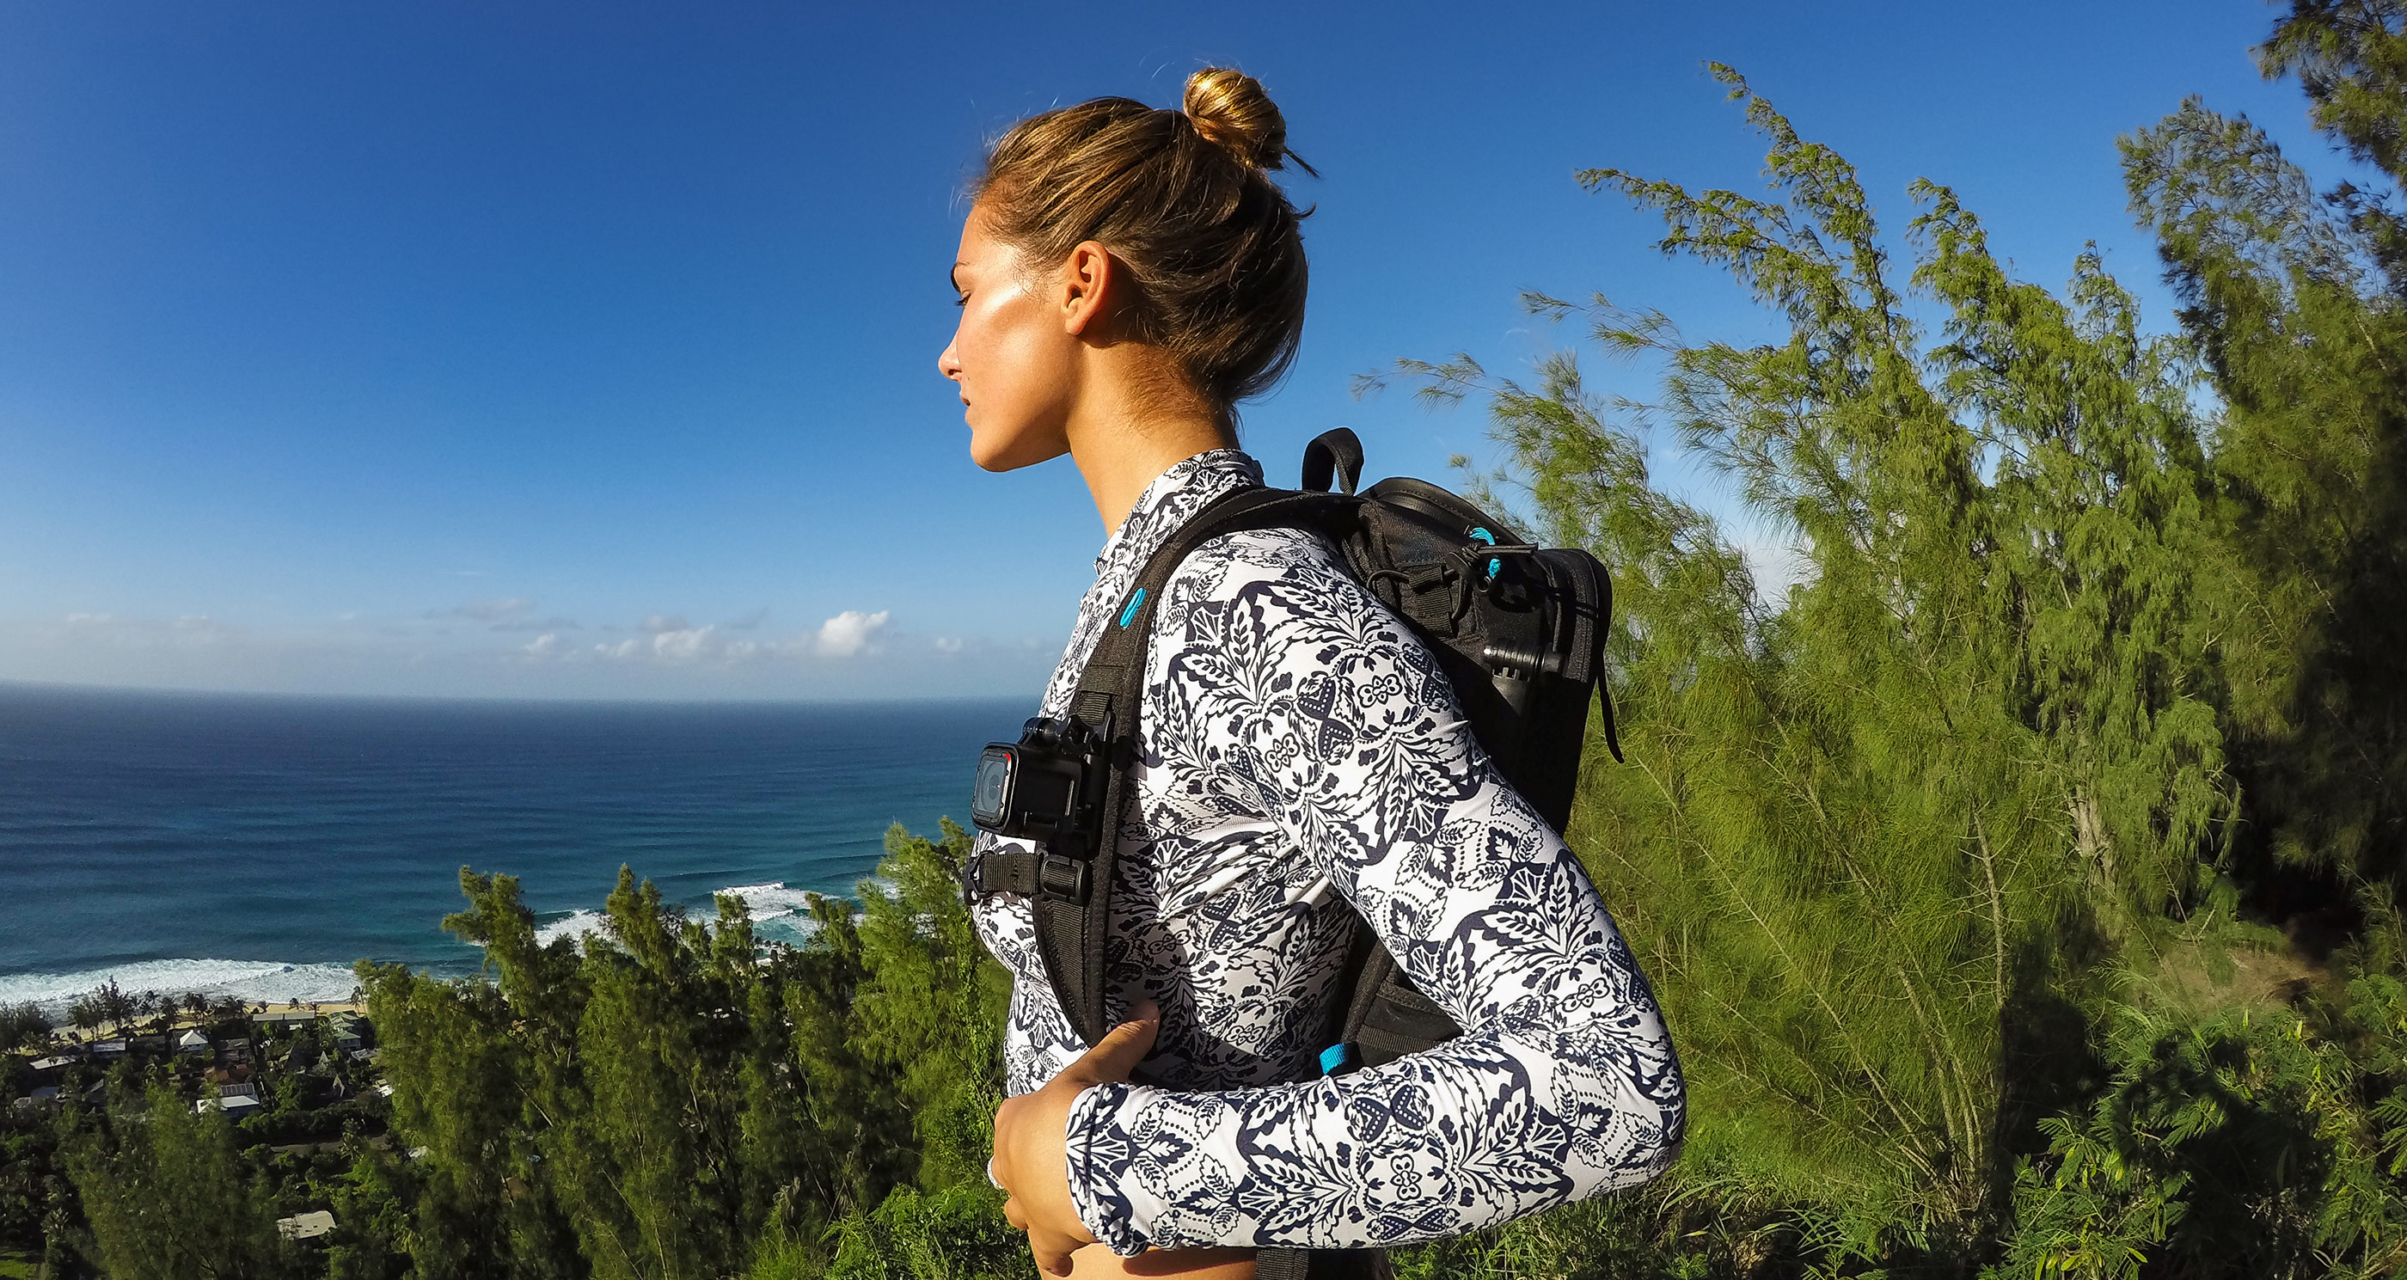 GoPro released a backpack specifically designed for its cameras